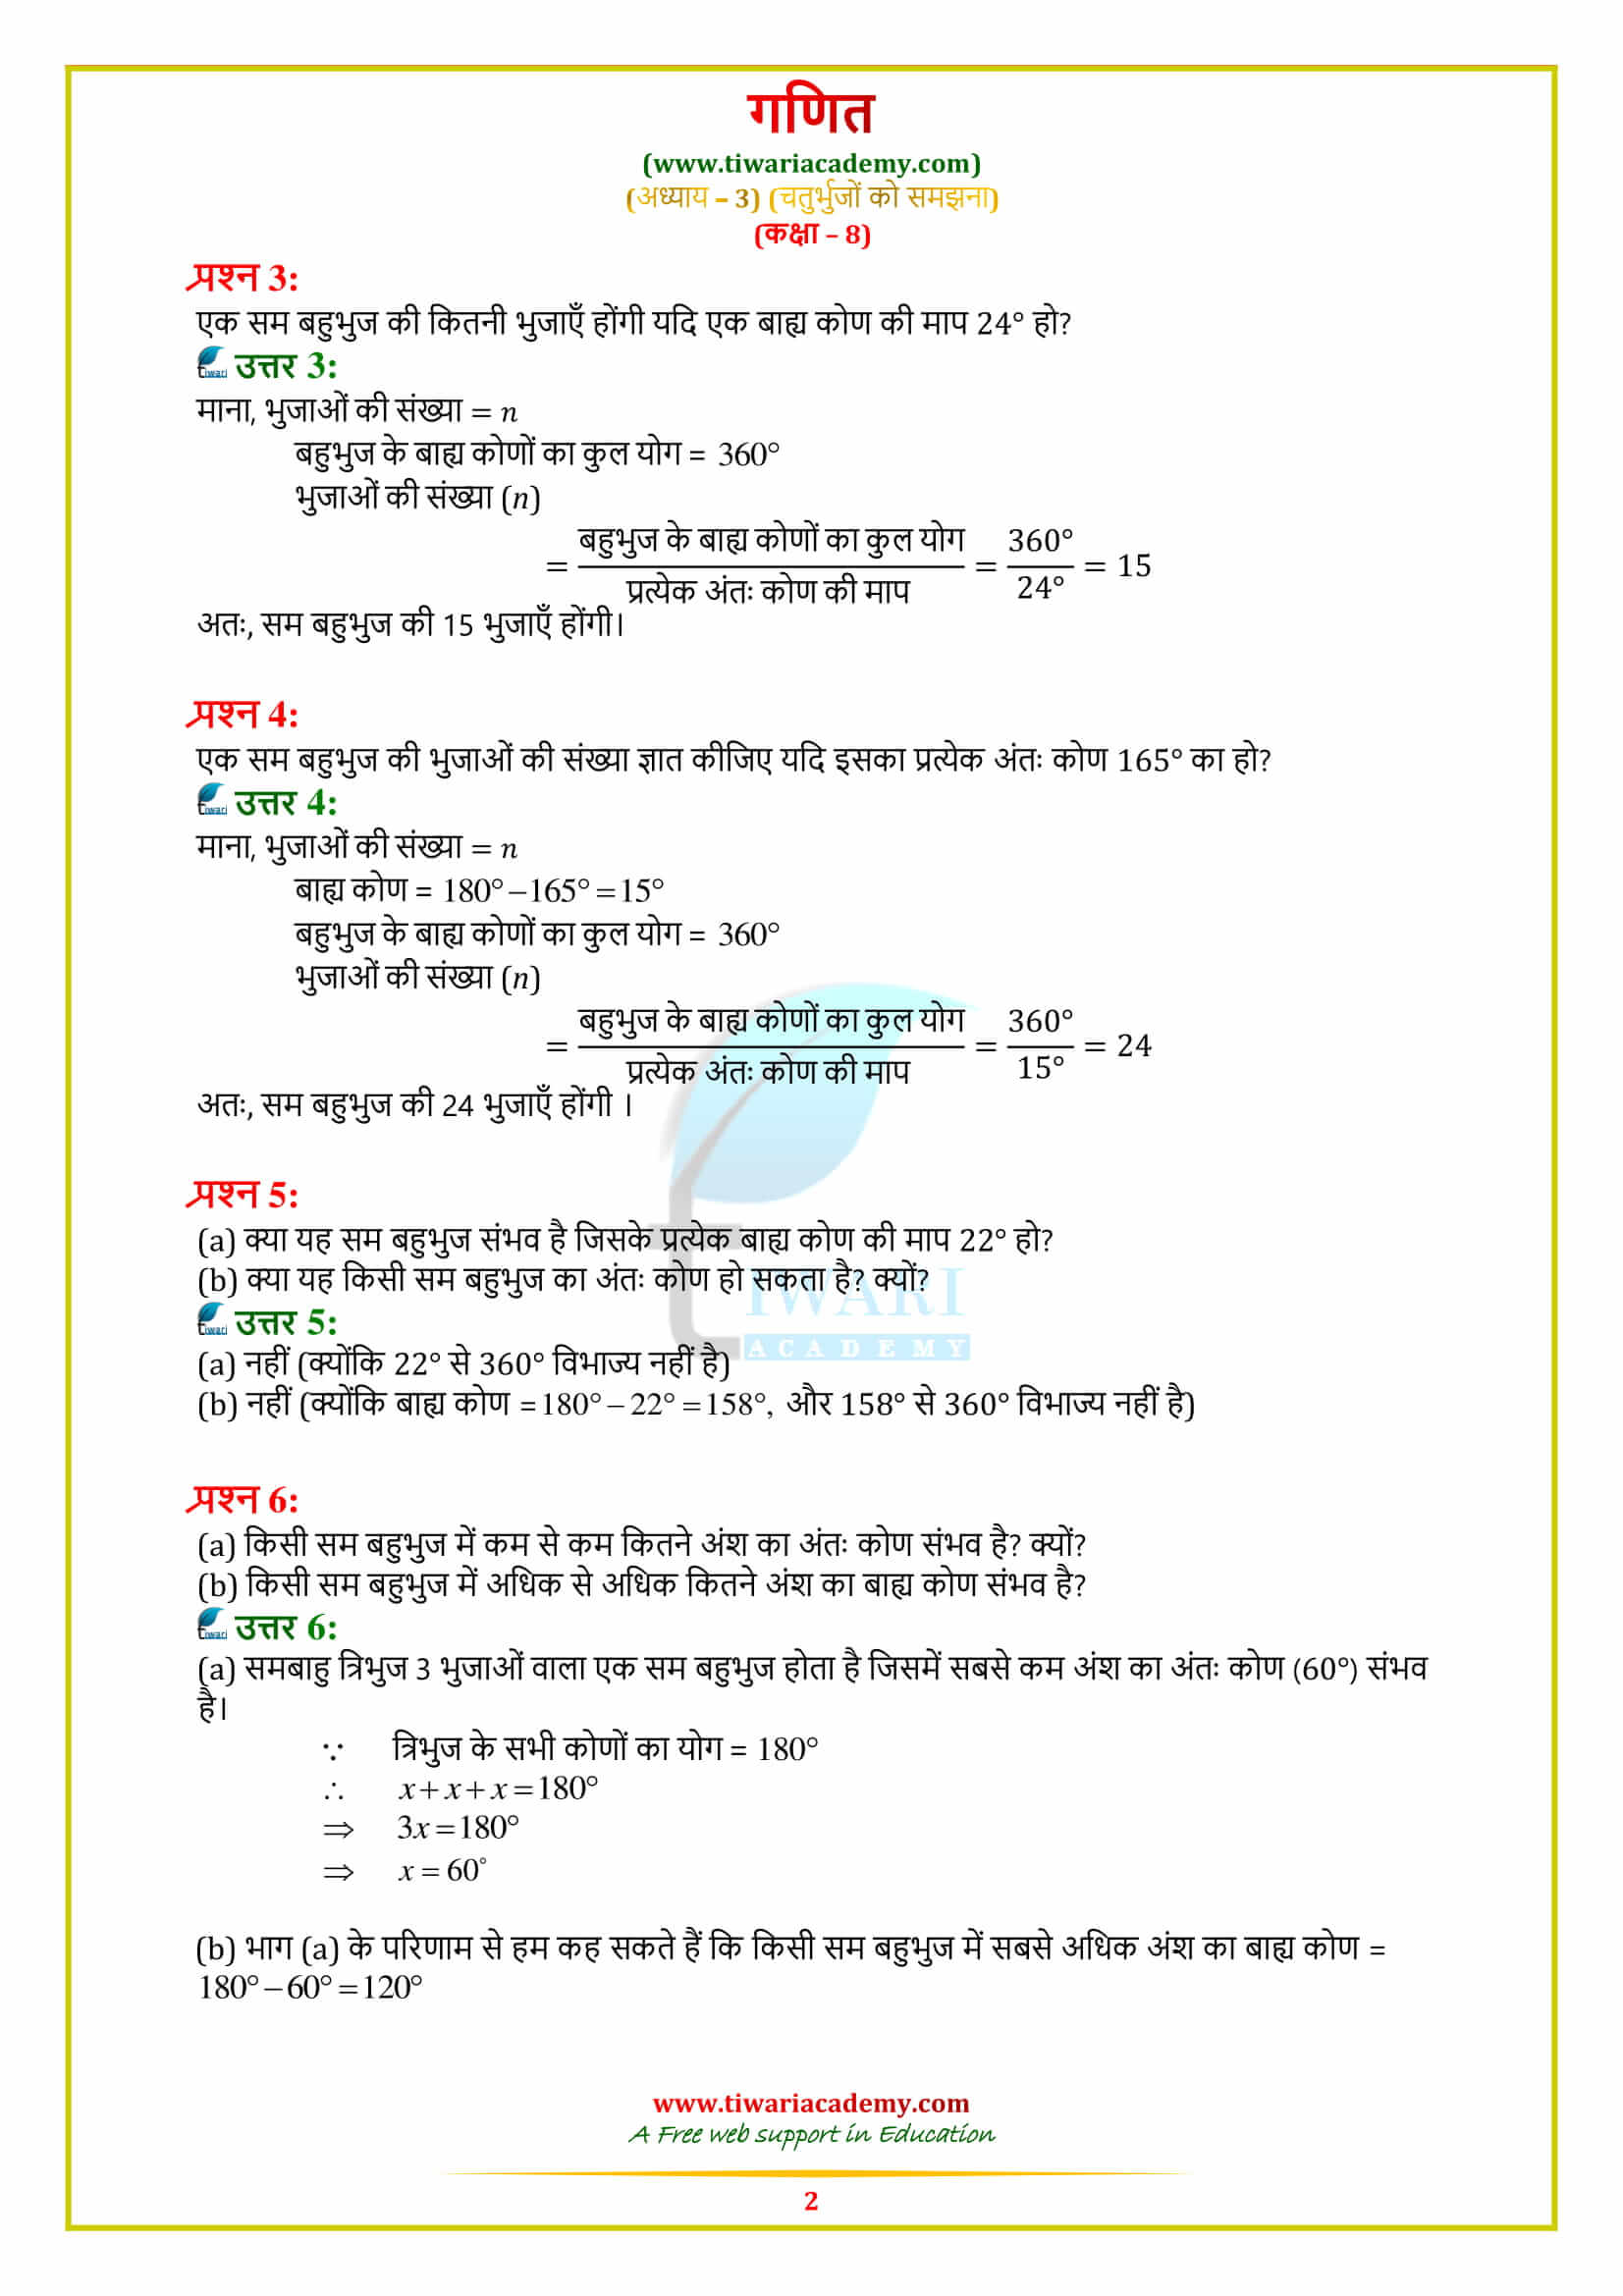 8 Maths Exercise 3.2 Solutions in hindi medium pdf download